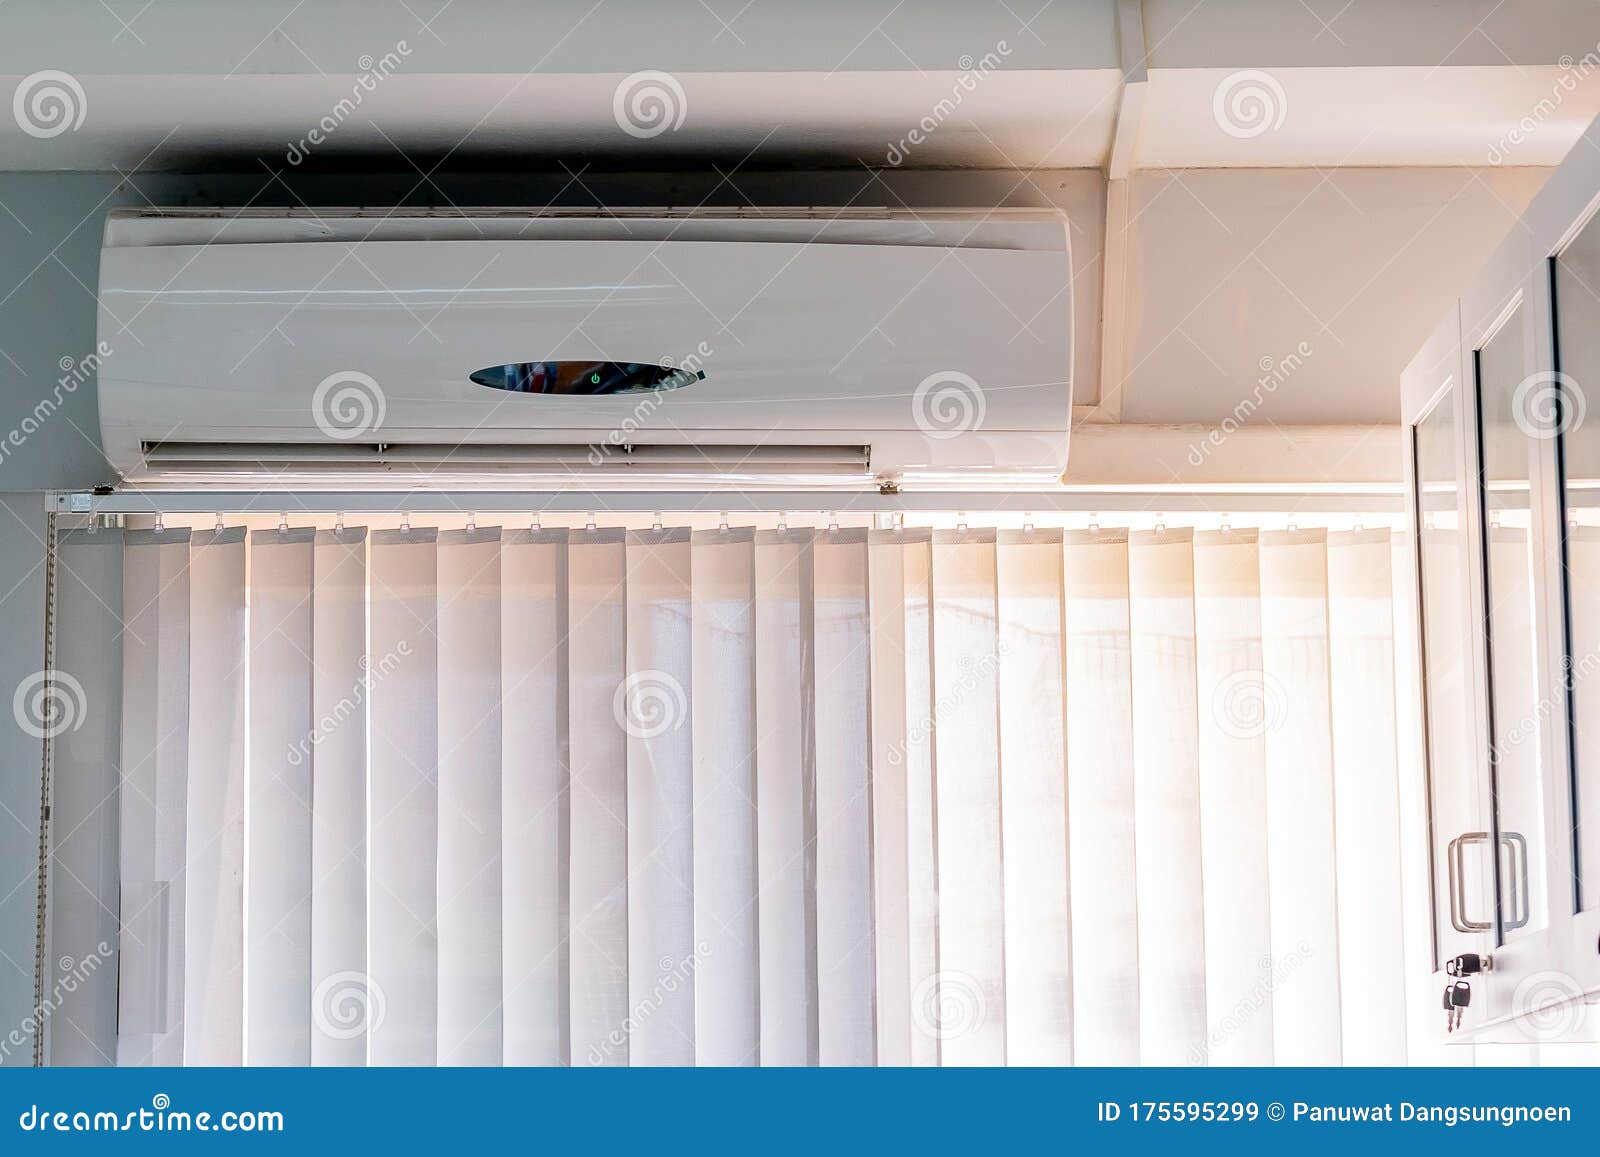 Air Conditioner Inside the Room of Office or House Stock Image - Image